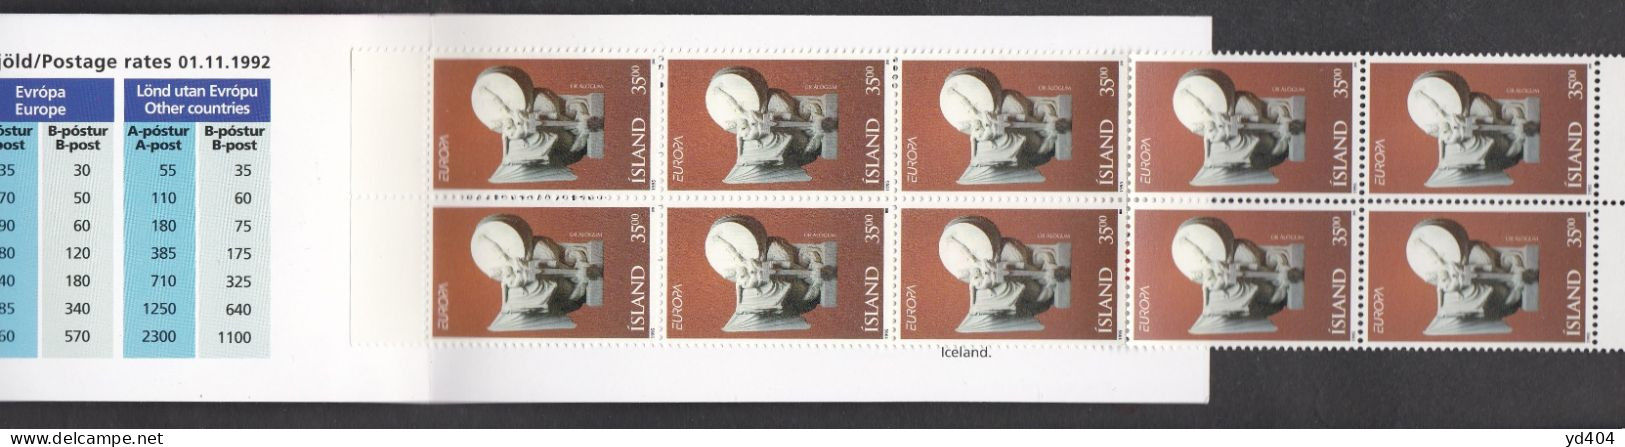 IS668A – ISLANDE - ICELAND - BOOKLETS - 1995 - EUROPA - Y&T # C777 MNH 15 € - Carnets